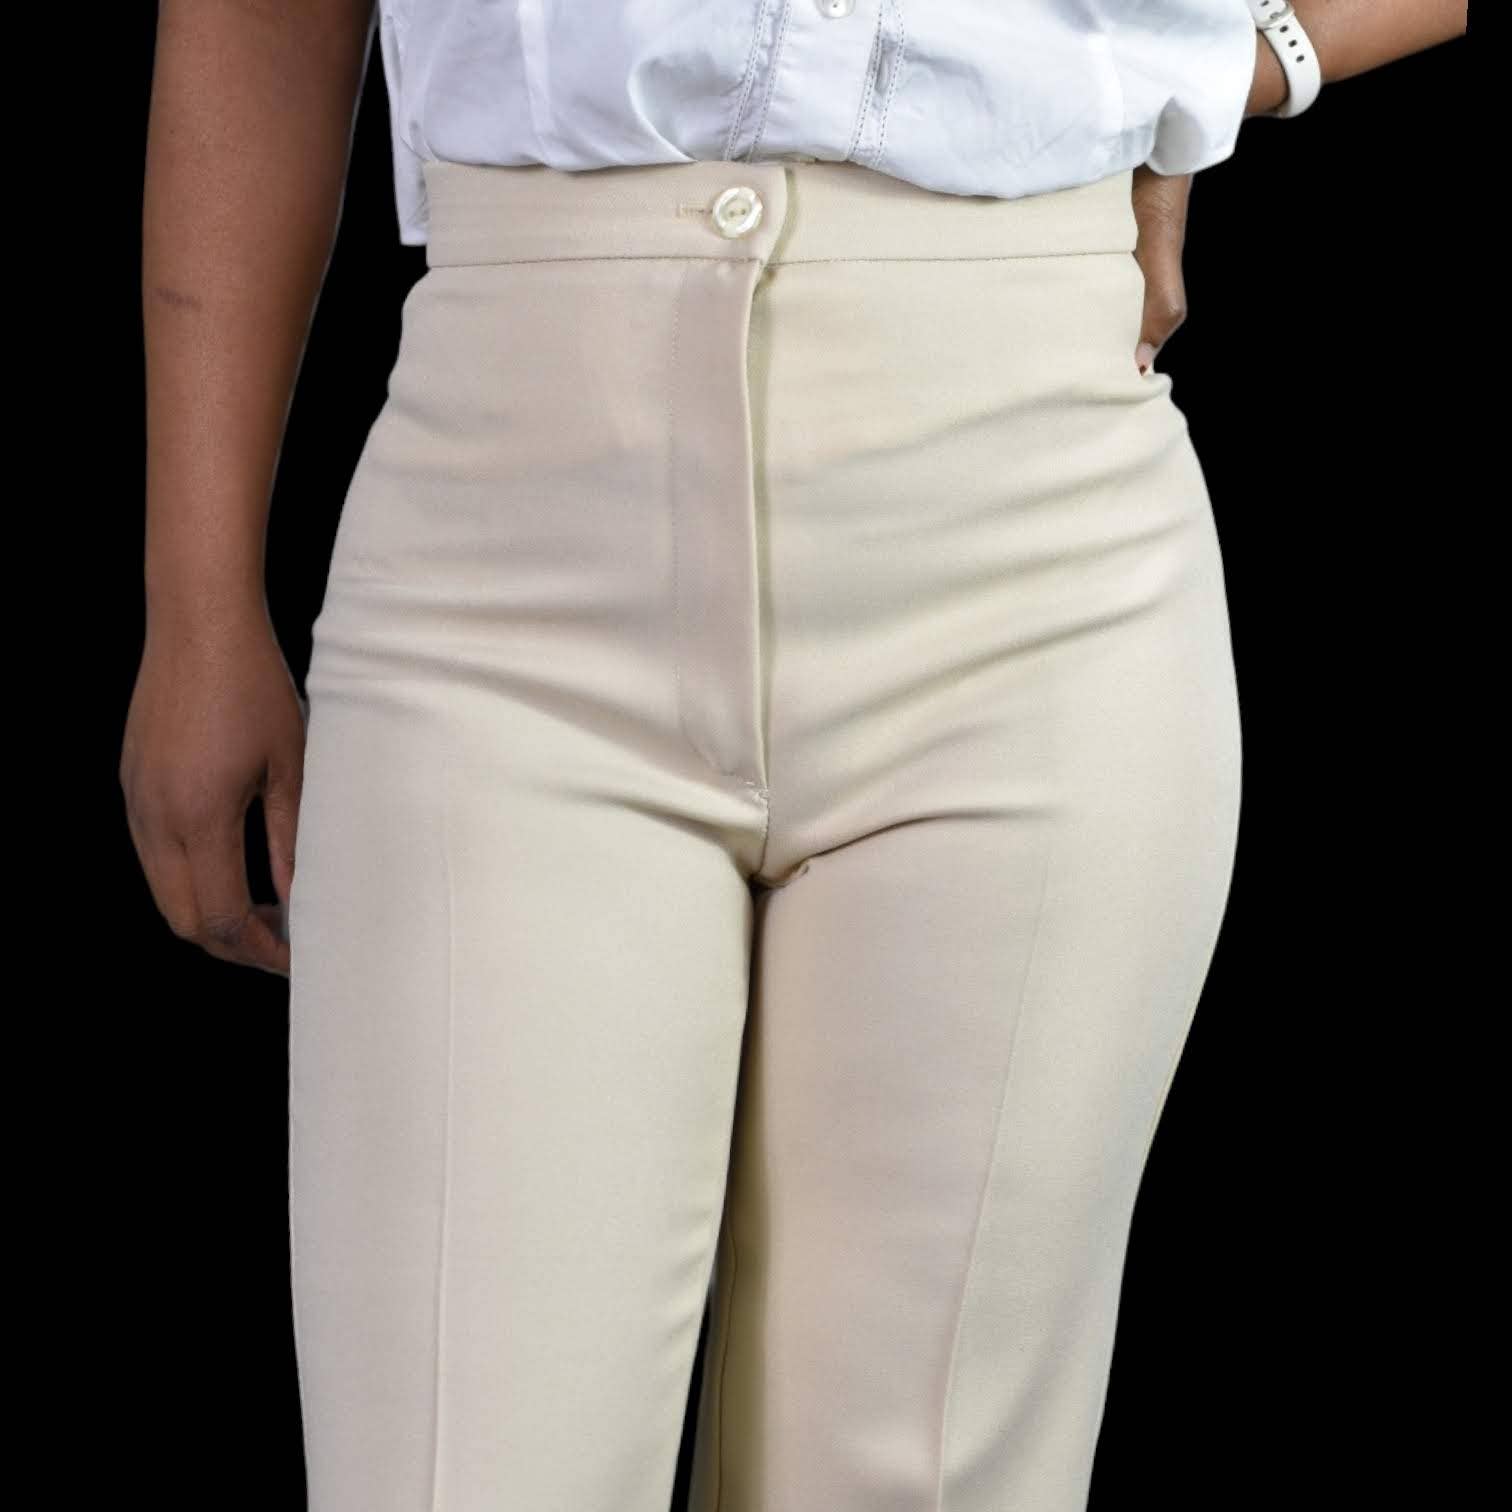 Vintage Polyester Pants Beige Trousers 70s Wide Leg High Waist Neutral Size 4 27